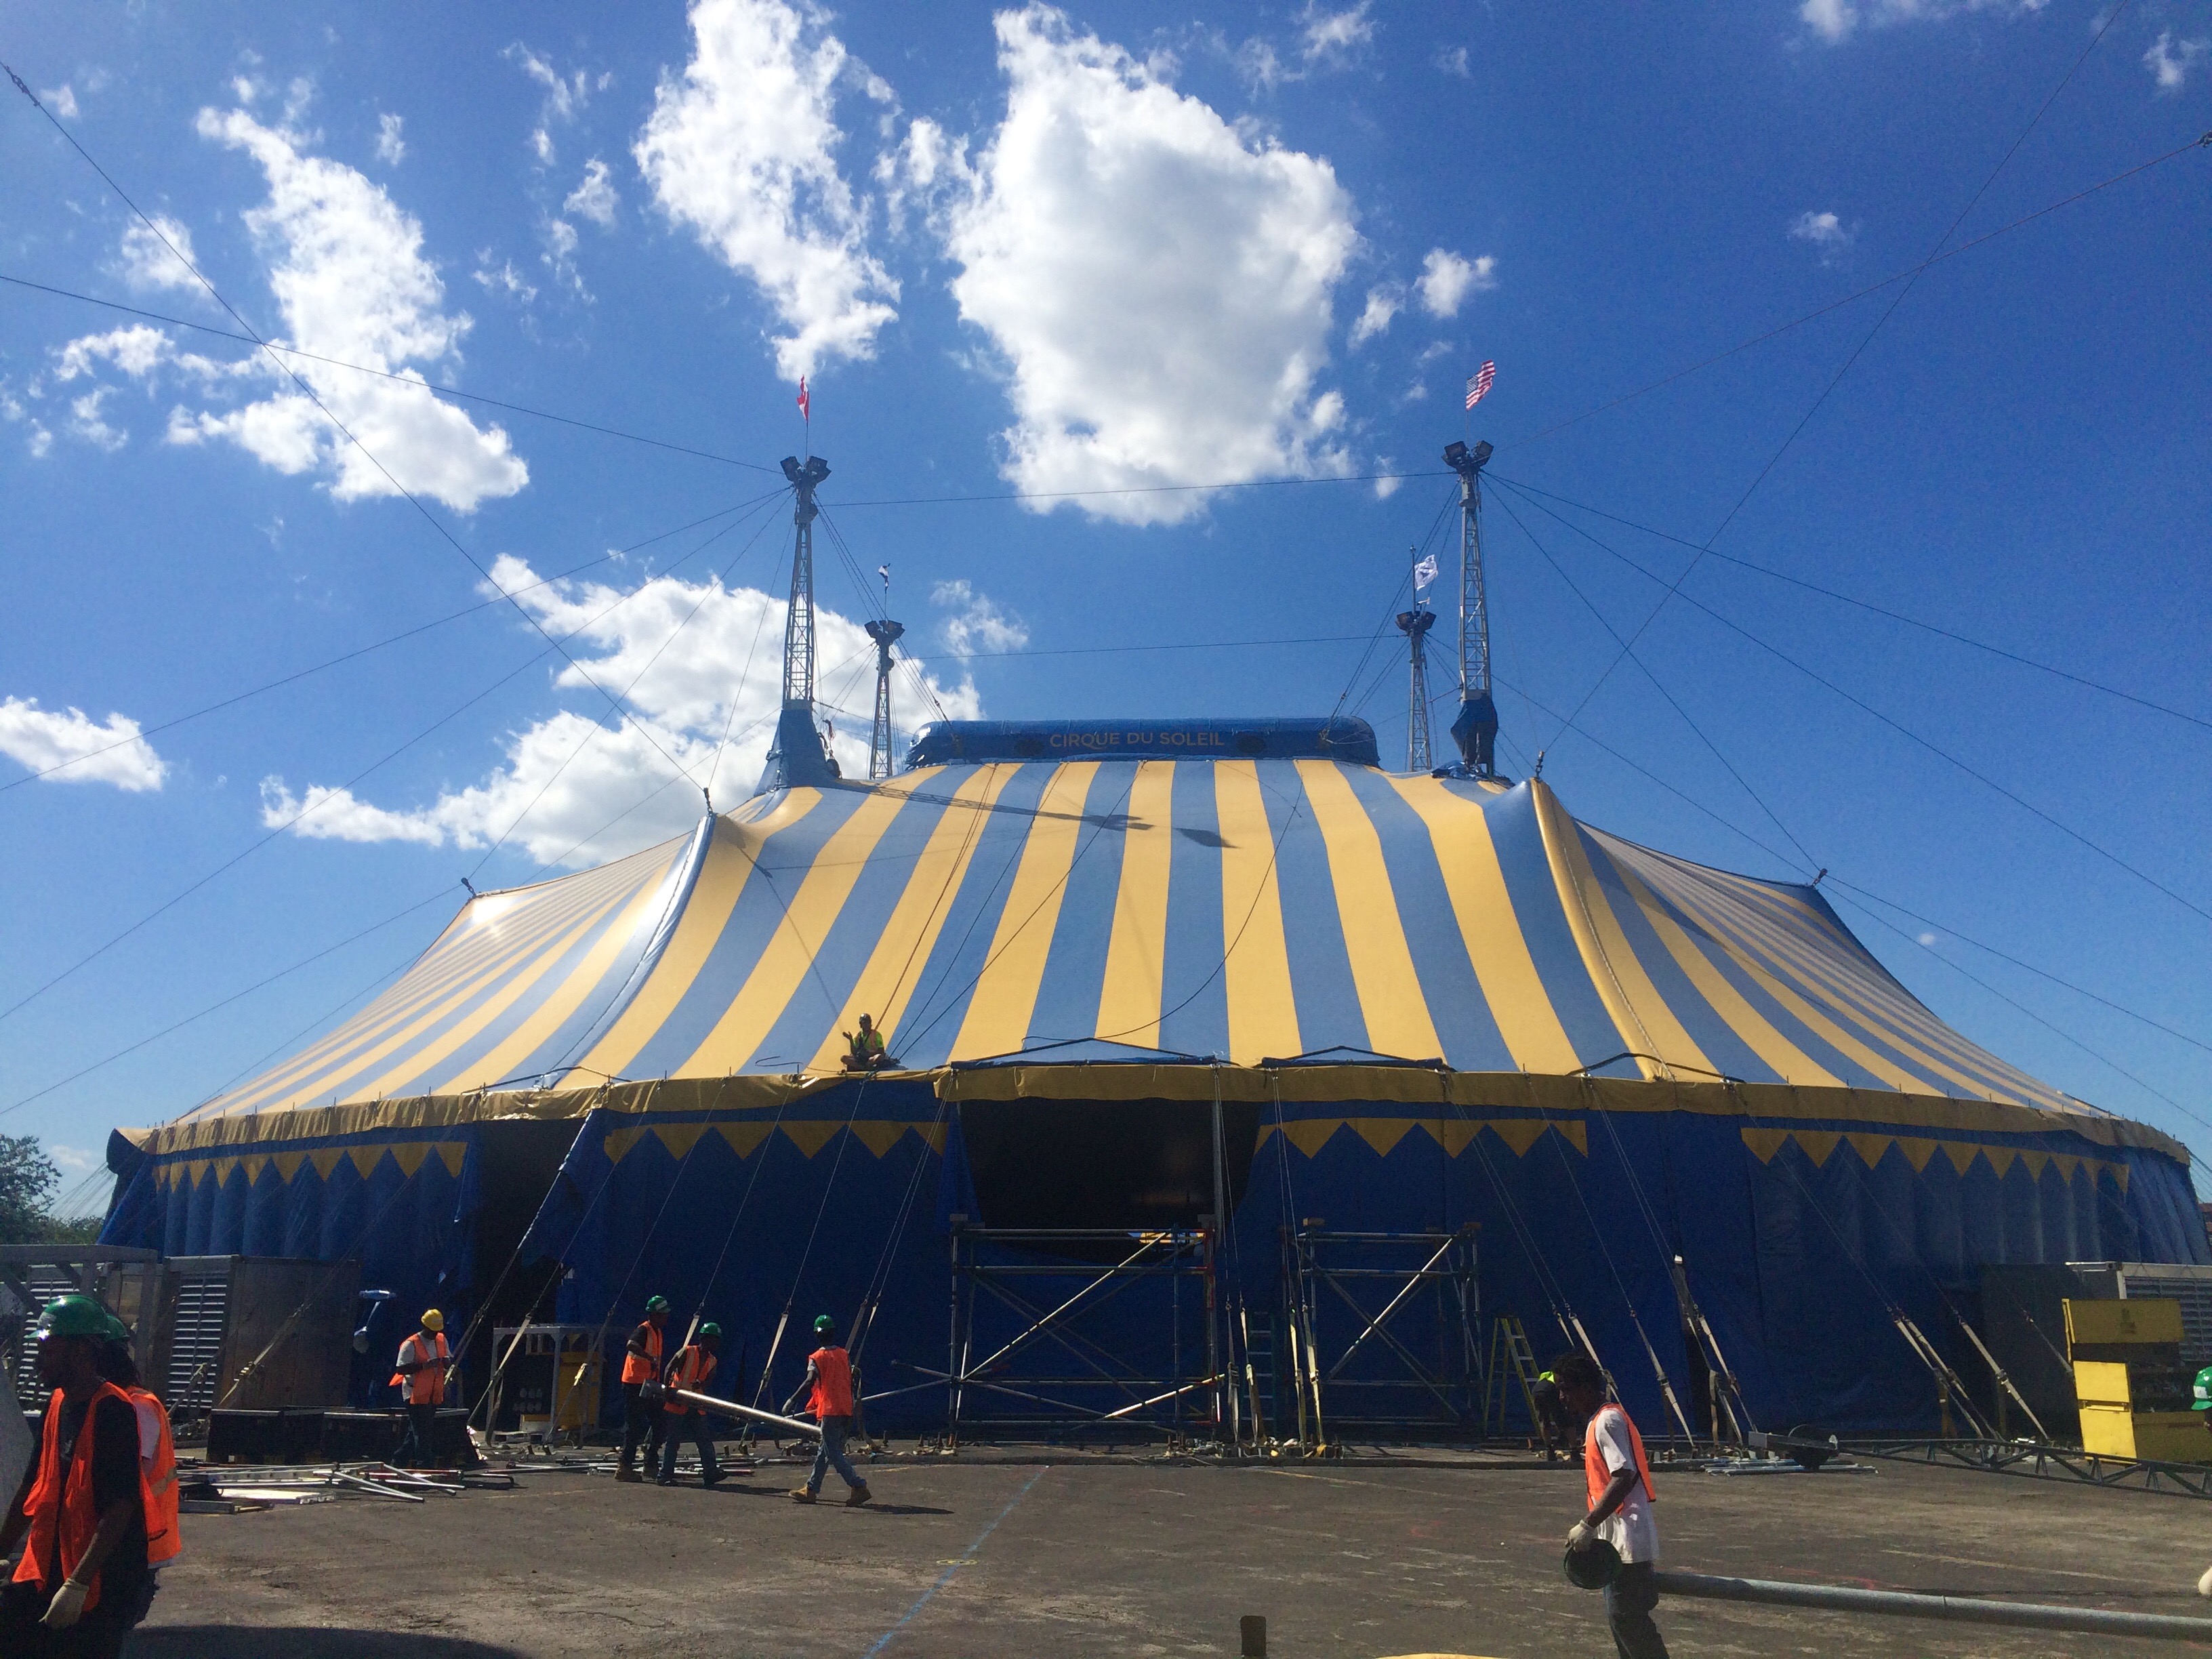 CIRQUE DU SOLEIL’S TRADEMARK BLUE-AND-YELLOW BIG TOP HAS ARRIVED IN CHICAGO! KURIOS – Cabinet of Curiosities™ Premieres Aug. 6th 2 SHOWBIZ NATION LIVE! Interview with EMPIRE VAMPIRE's KAT AUSTER, WILSON JARAMILLO, ISIS MASOUD & ROGER INGRAHAM from SHOWBIZ CHICAGO on Vimeo.